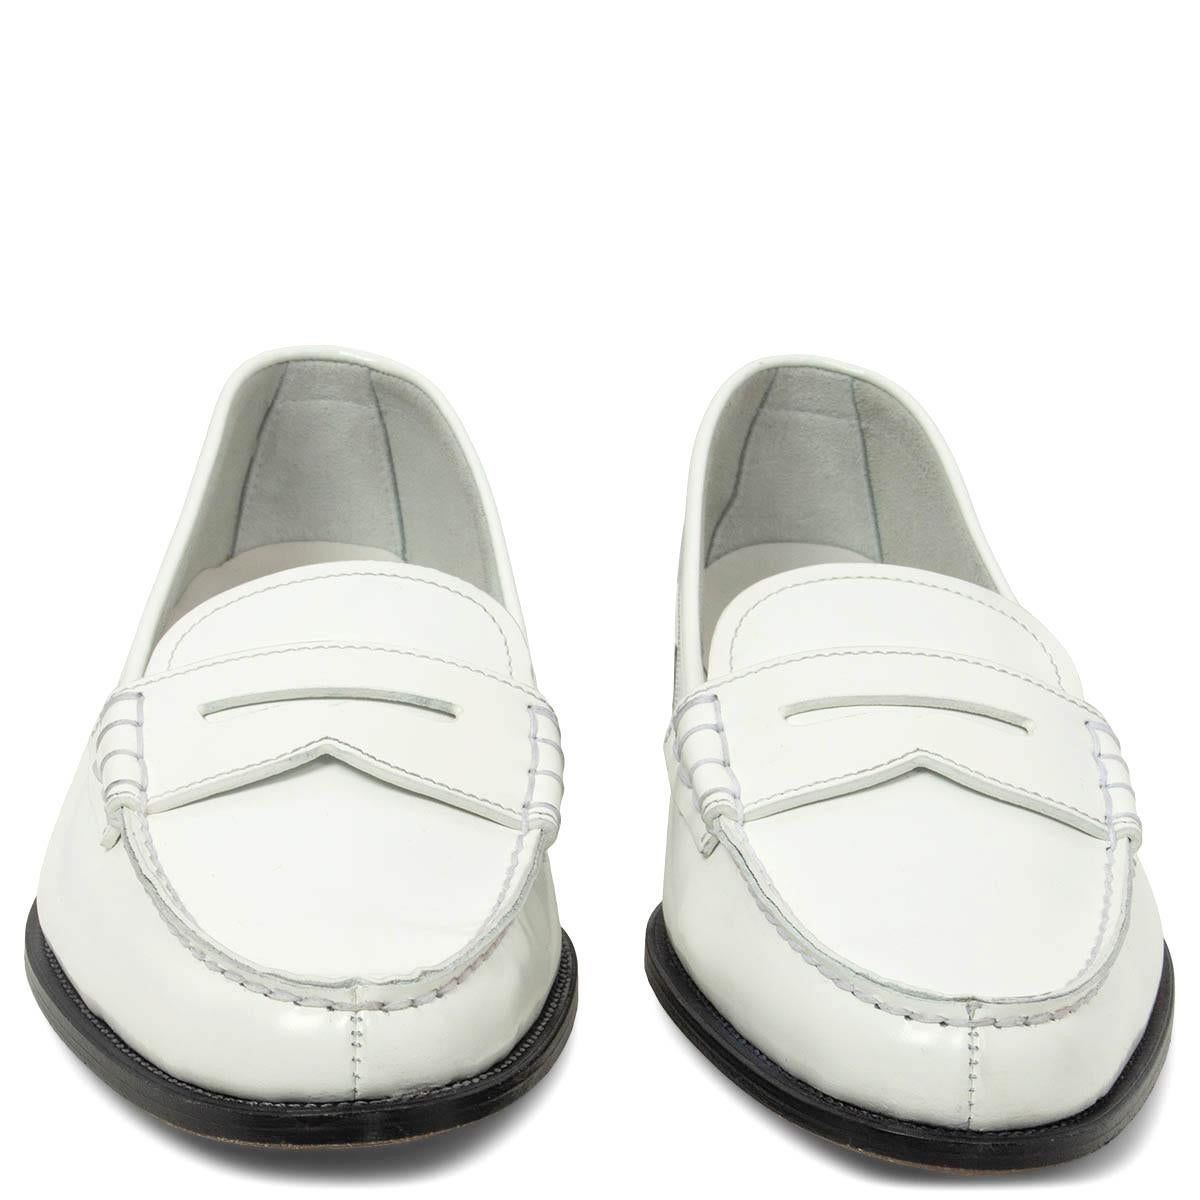 100% authentic Church's Kara loafers in white glazed leather. Have been worn once inside and shows a very soft darker spot on the inside of the right heel. Overall in virtually new condition. 

Measurements
Imprinted Size	39.5
Shoe Size	39.5
Inside